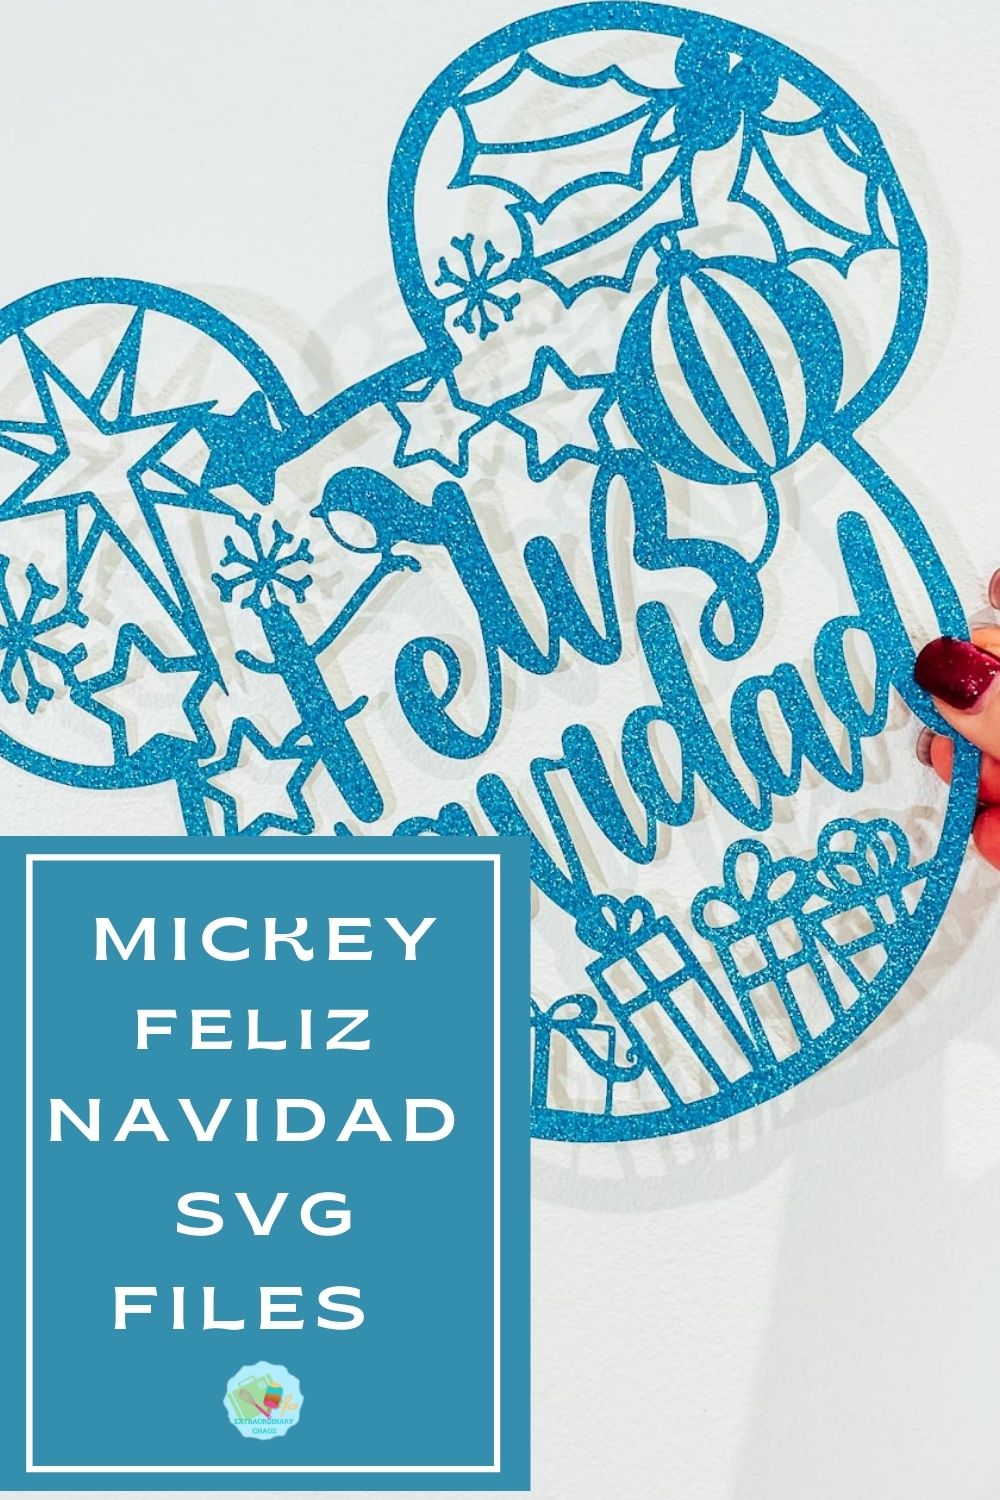 Mickey Feliz Navidad Free SVG, PNG files for Crafting with Cricut or Silhouette